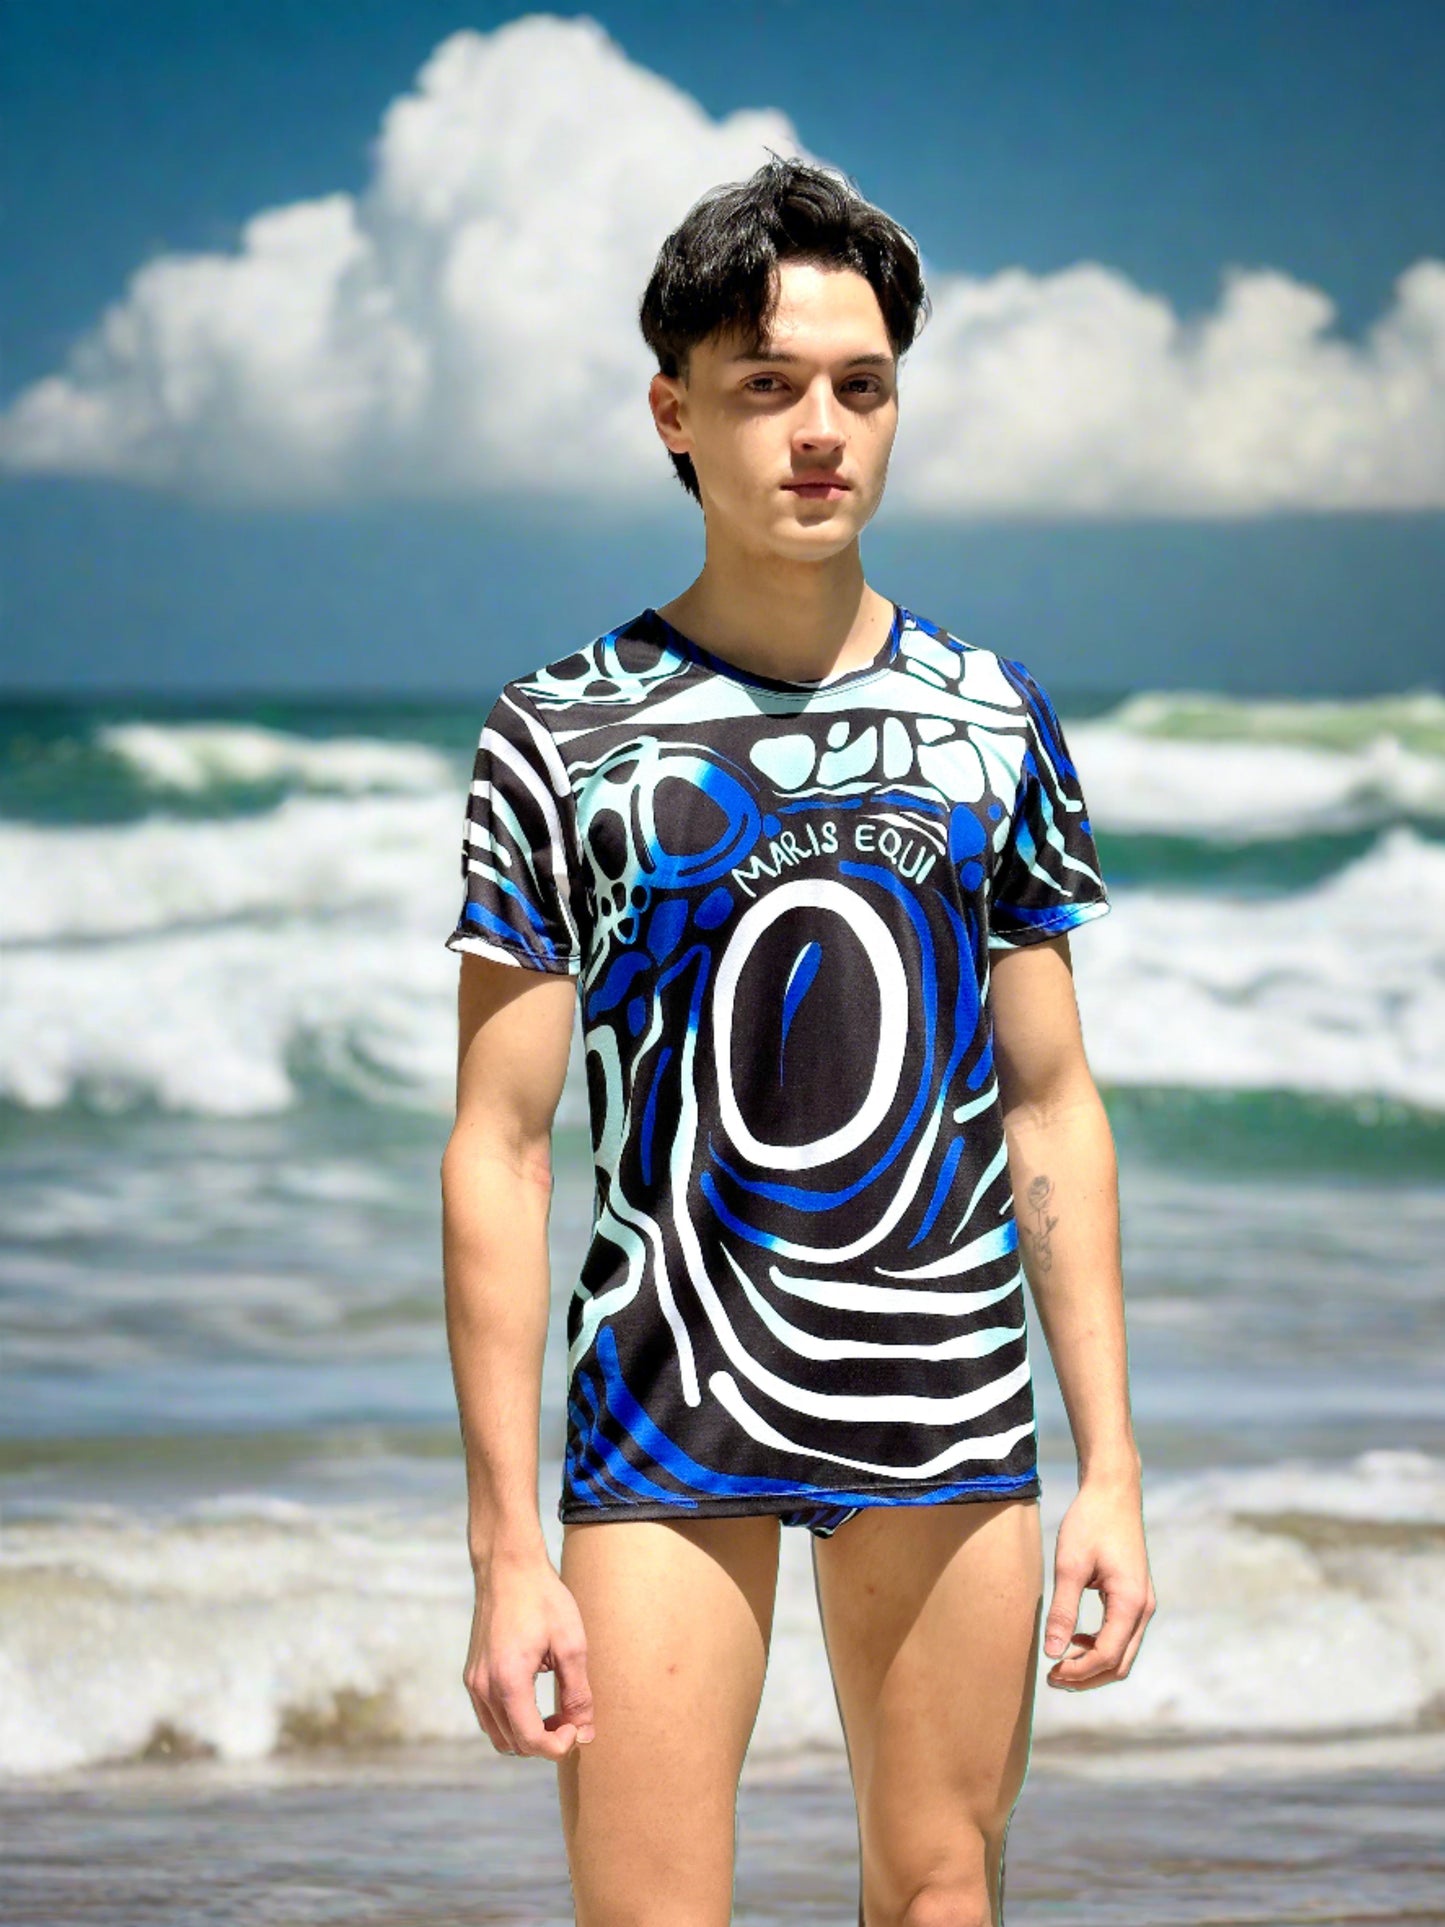 Our Angelfish Swim Brief for men and our coordinating Sport Shirt. The suit has a Speedo style cut. 